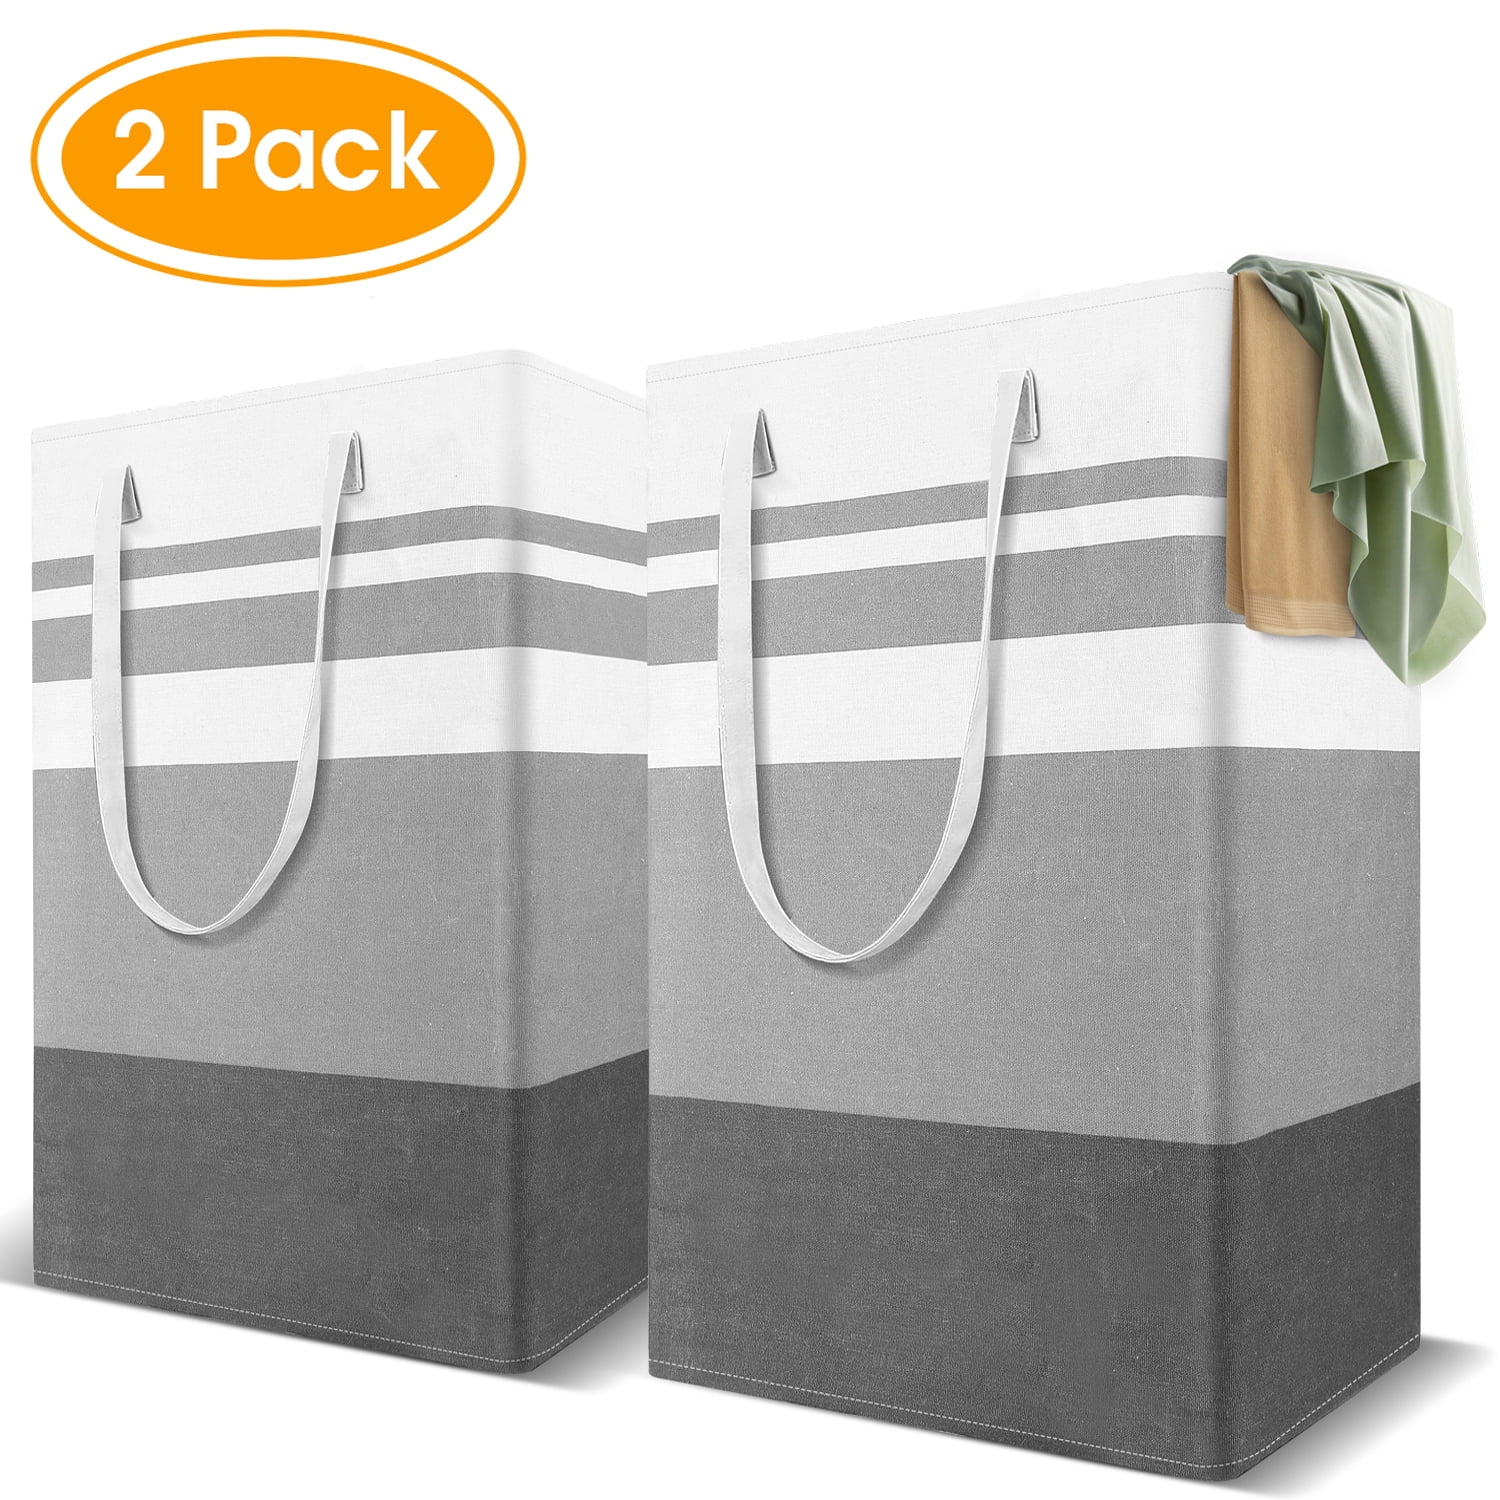 2Pack 75L Large Freestanding Laundry Hamper, iFanze Collapsible Laundry ...